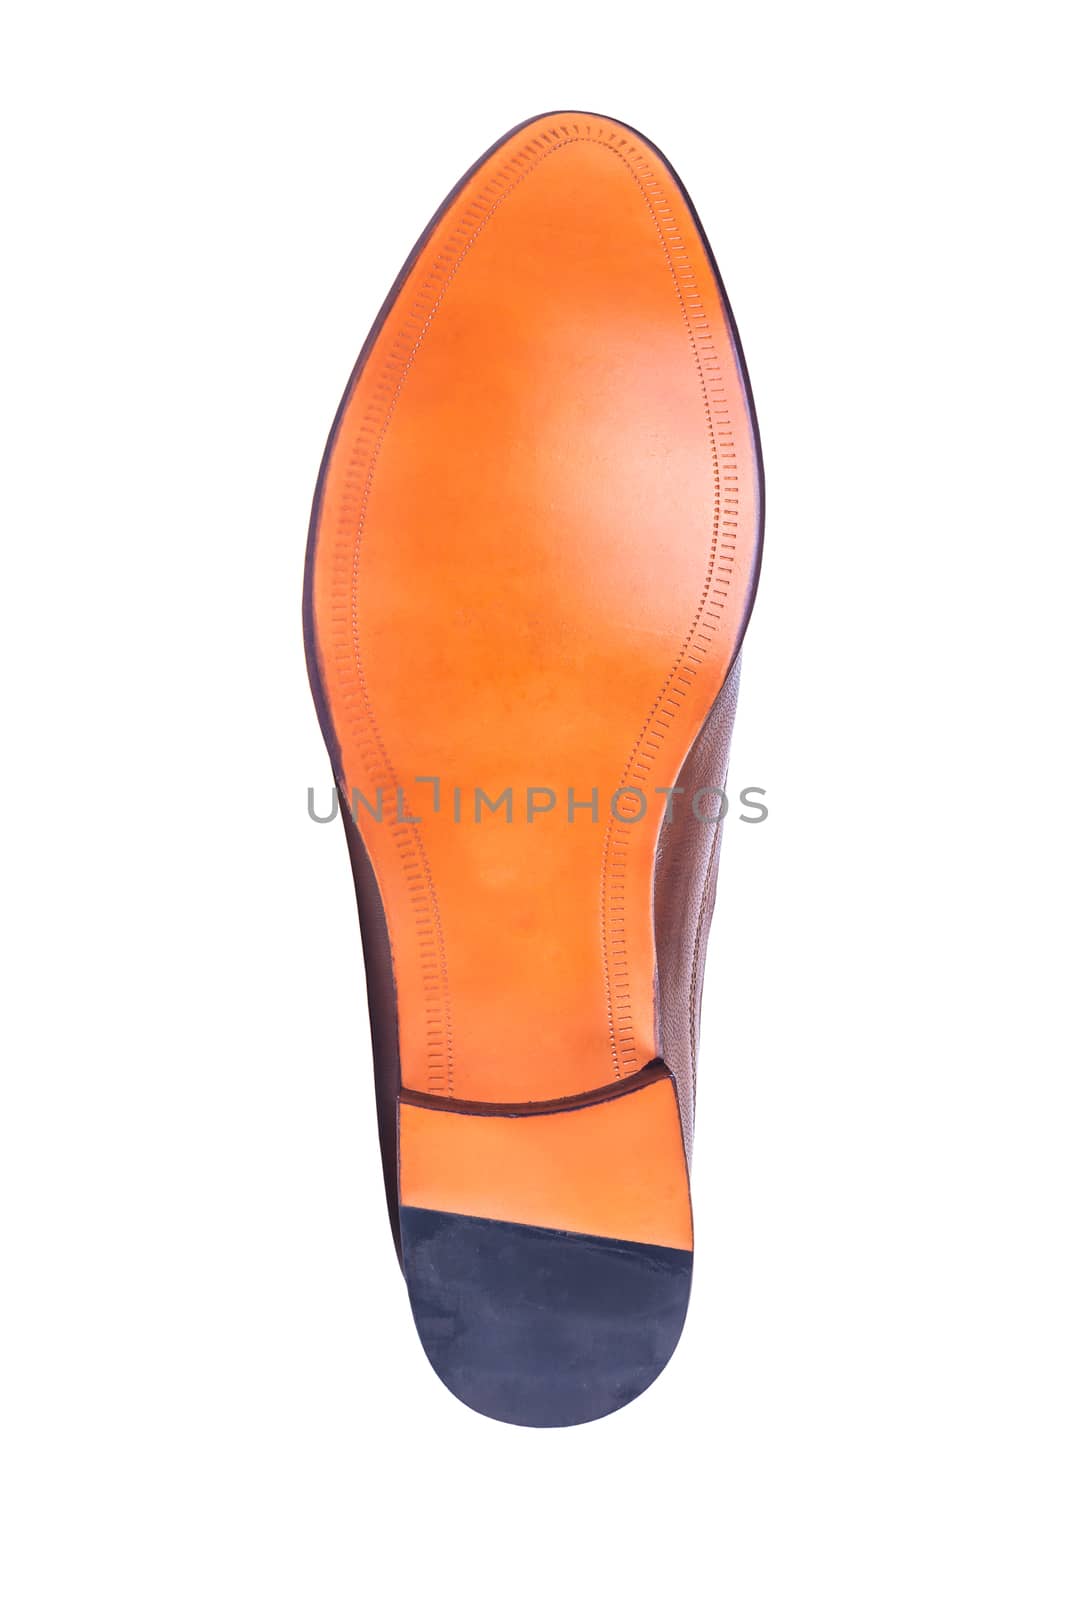 Rubber sole of a men's shoe on white background